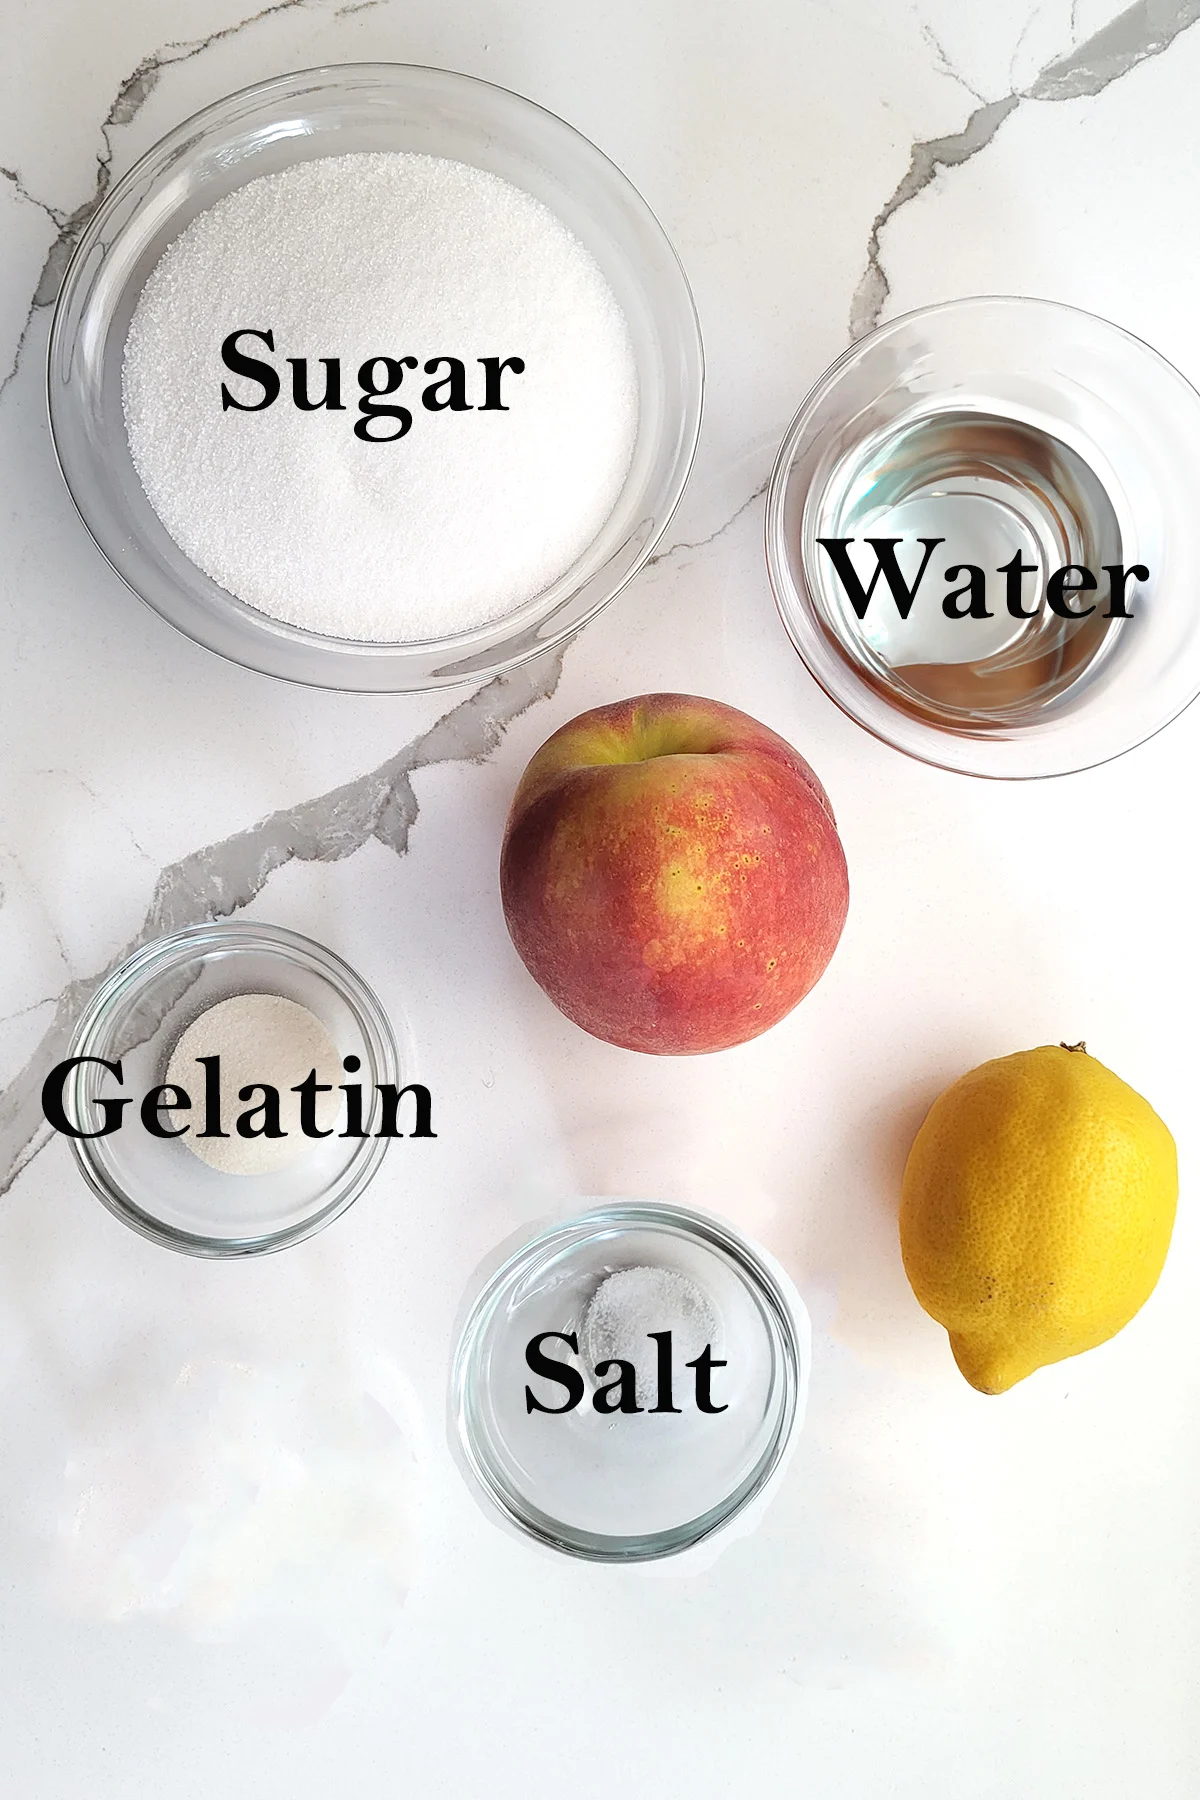 ingredients for peach glaze in glass bowls on a white surface.